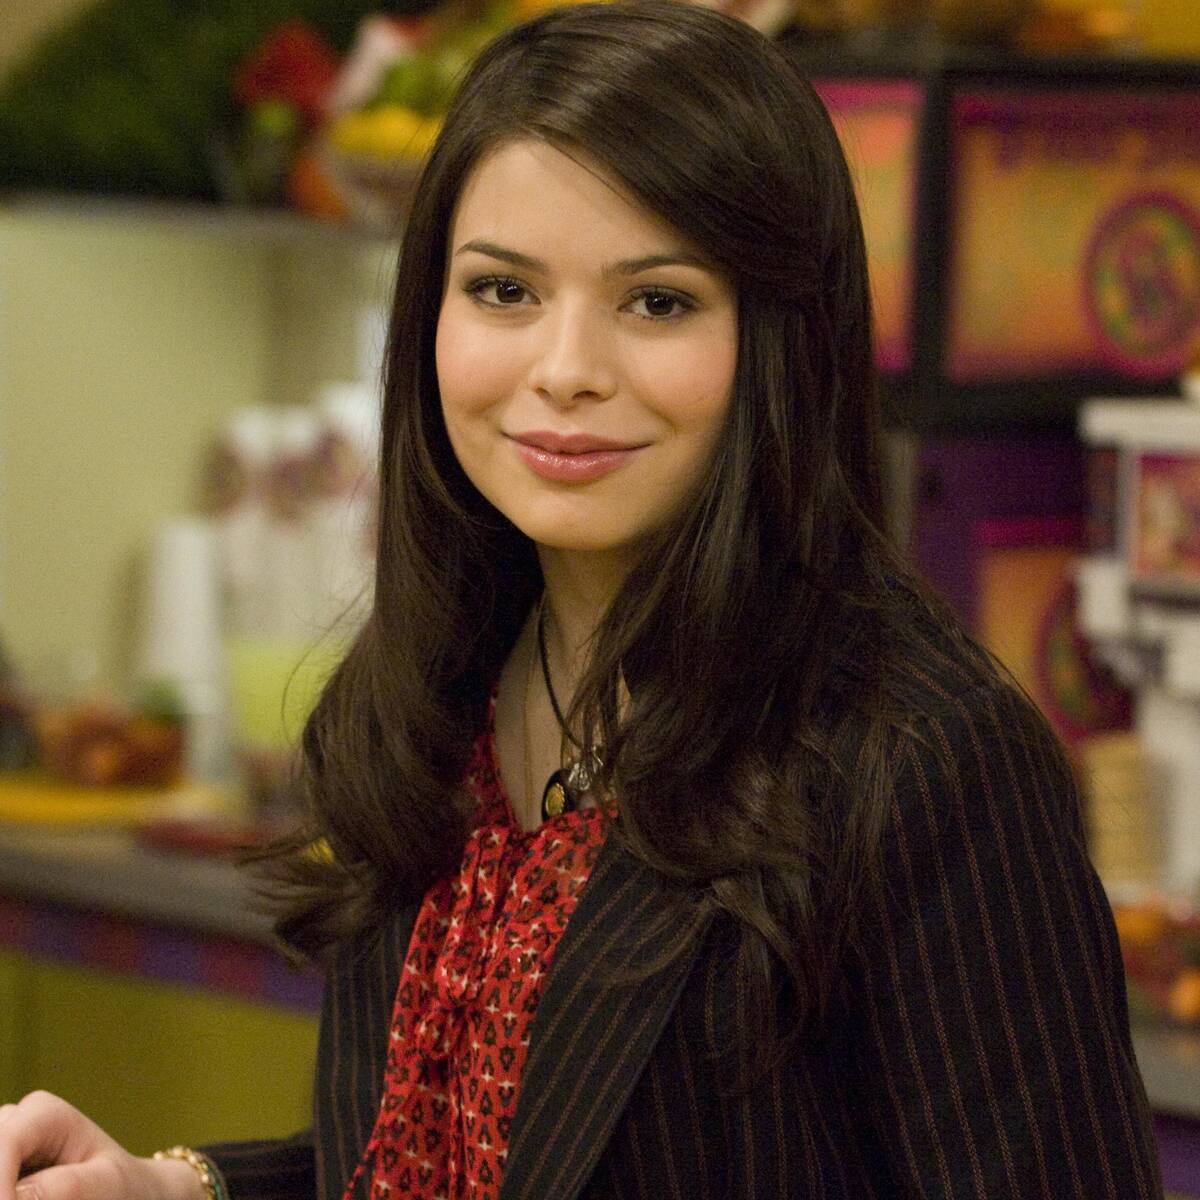 An iCarly Reunion Is Happening So Much Sooner Than You Thought